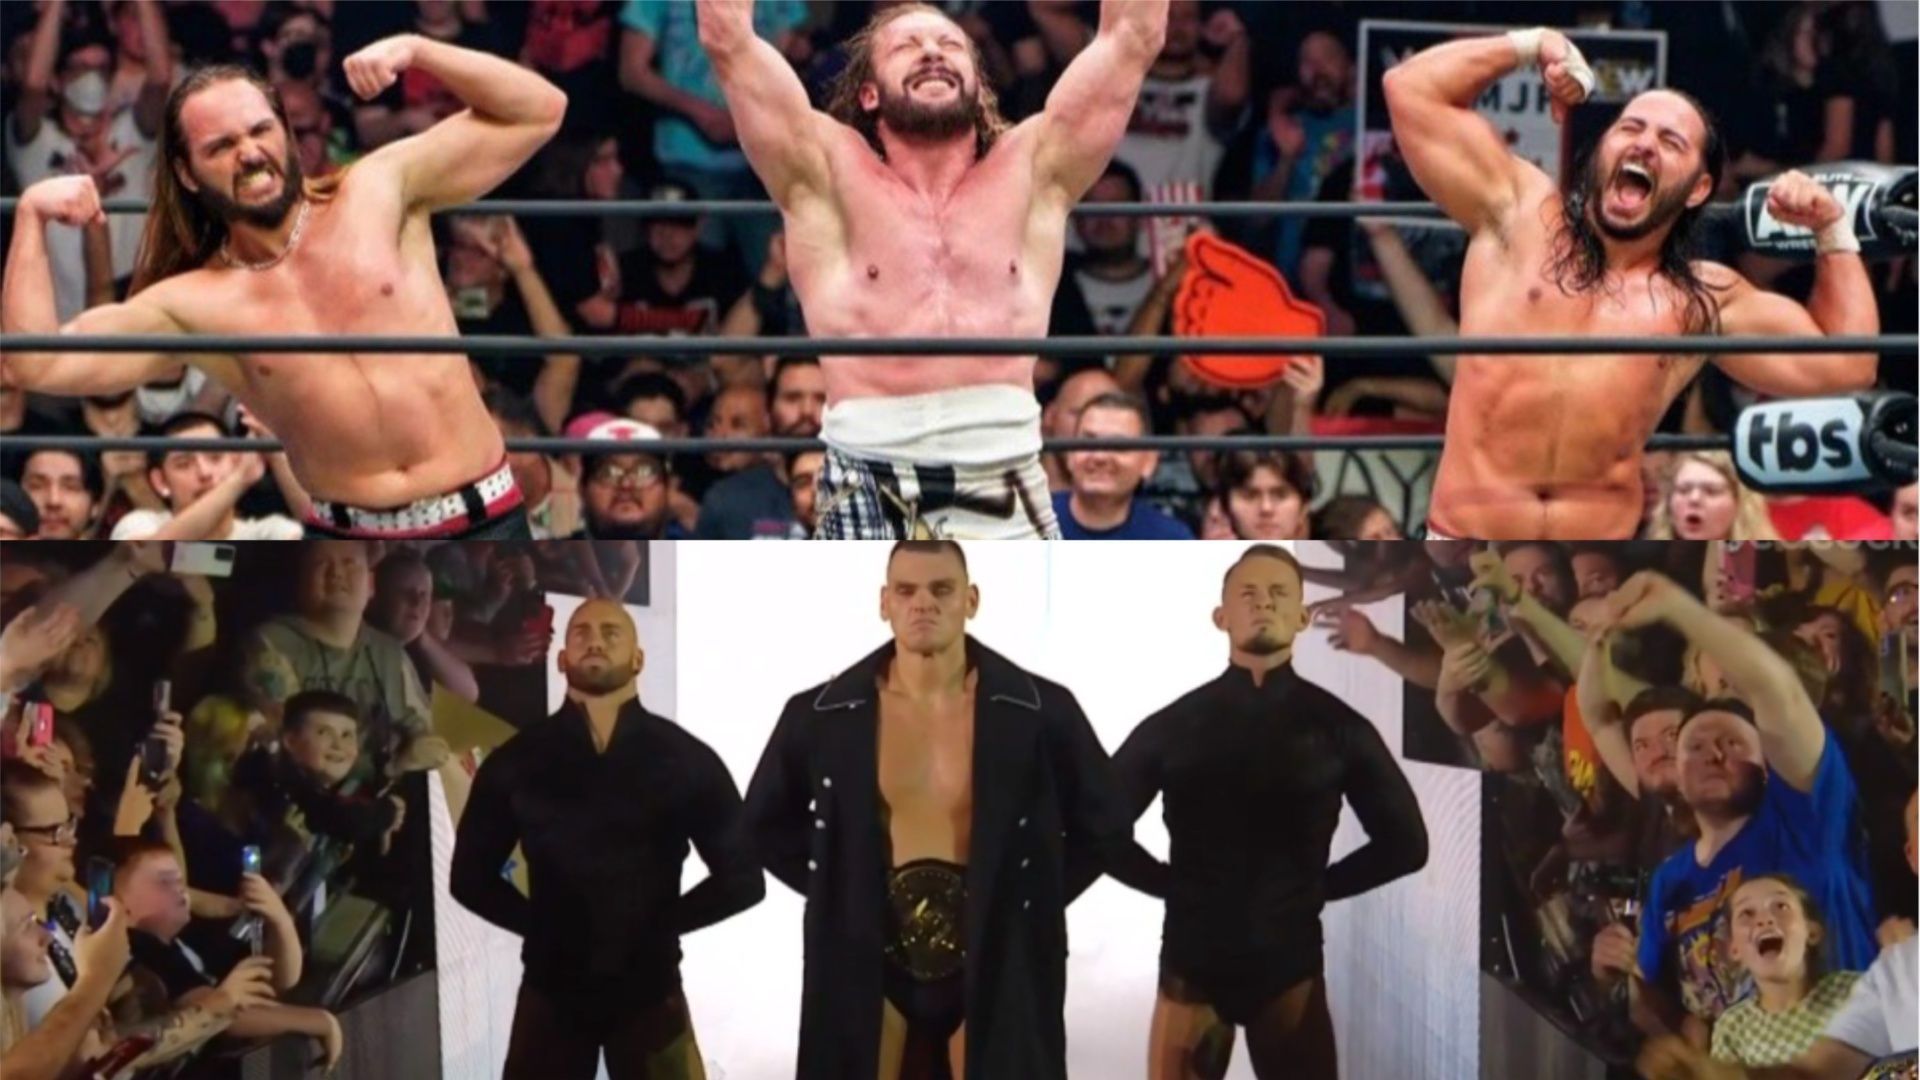 The Elite and Imperium could be a wrestling clinic.